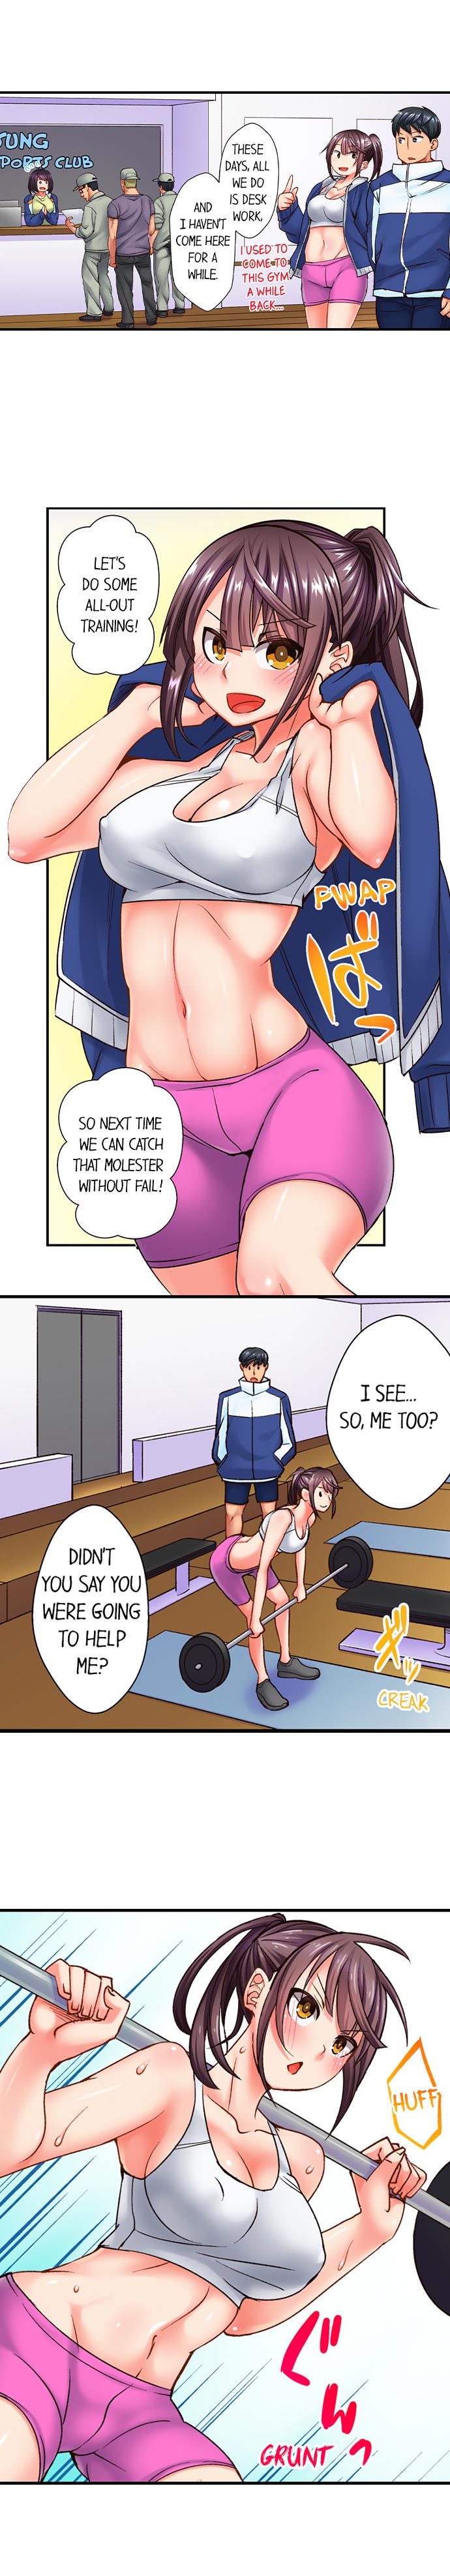 You Cum, You Lose! ~Wrestling with a Pervert~ - Chapter 13 Page 4